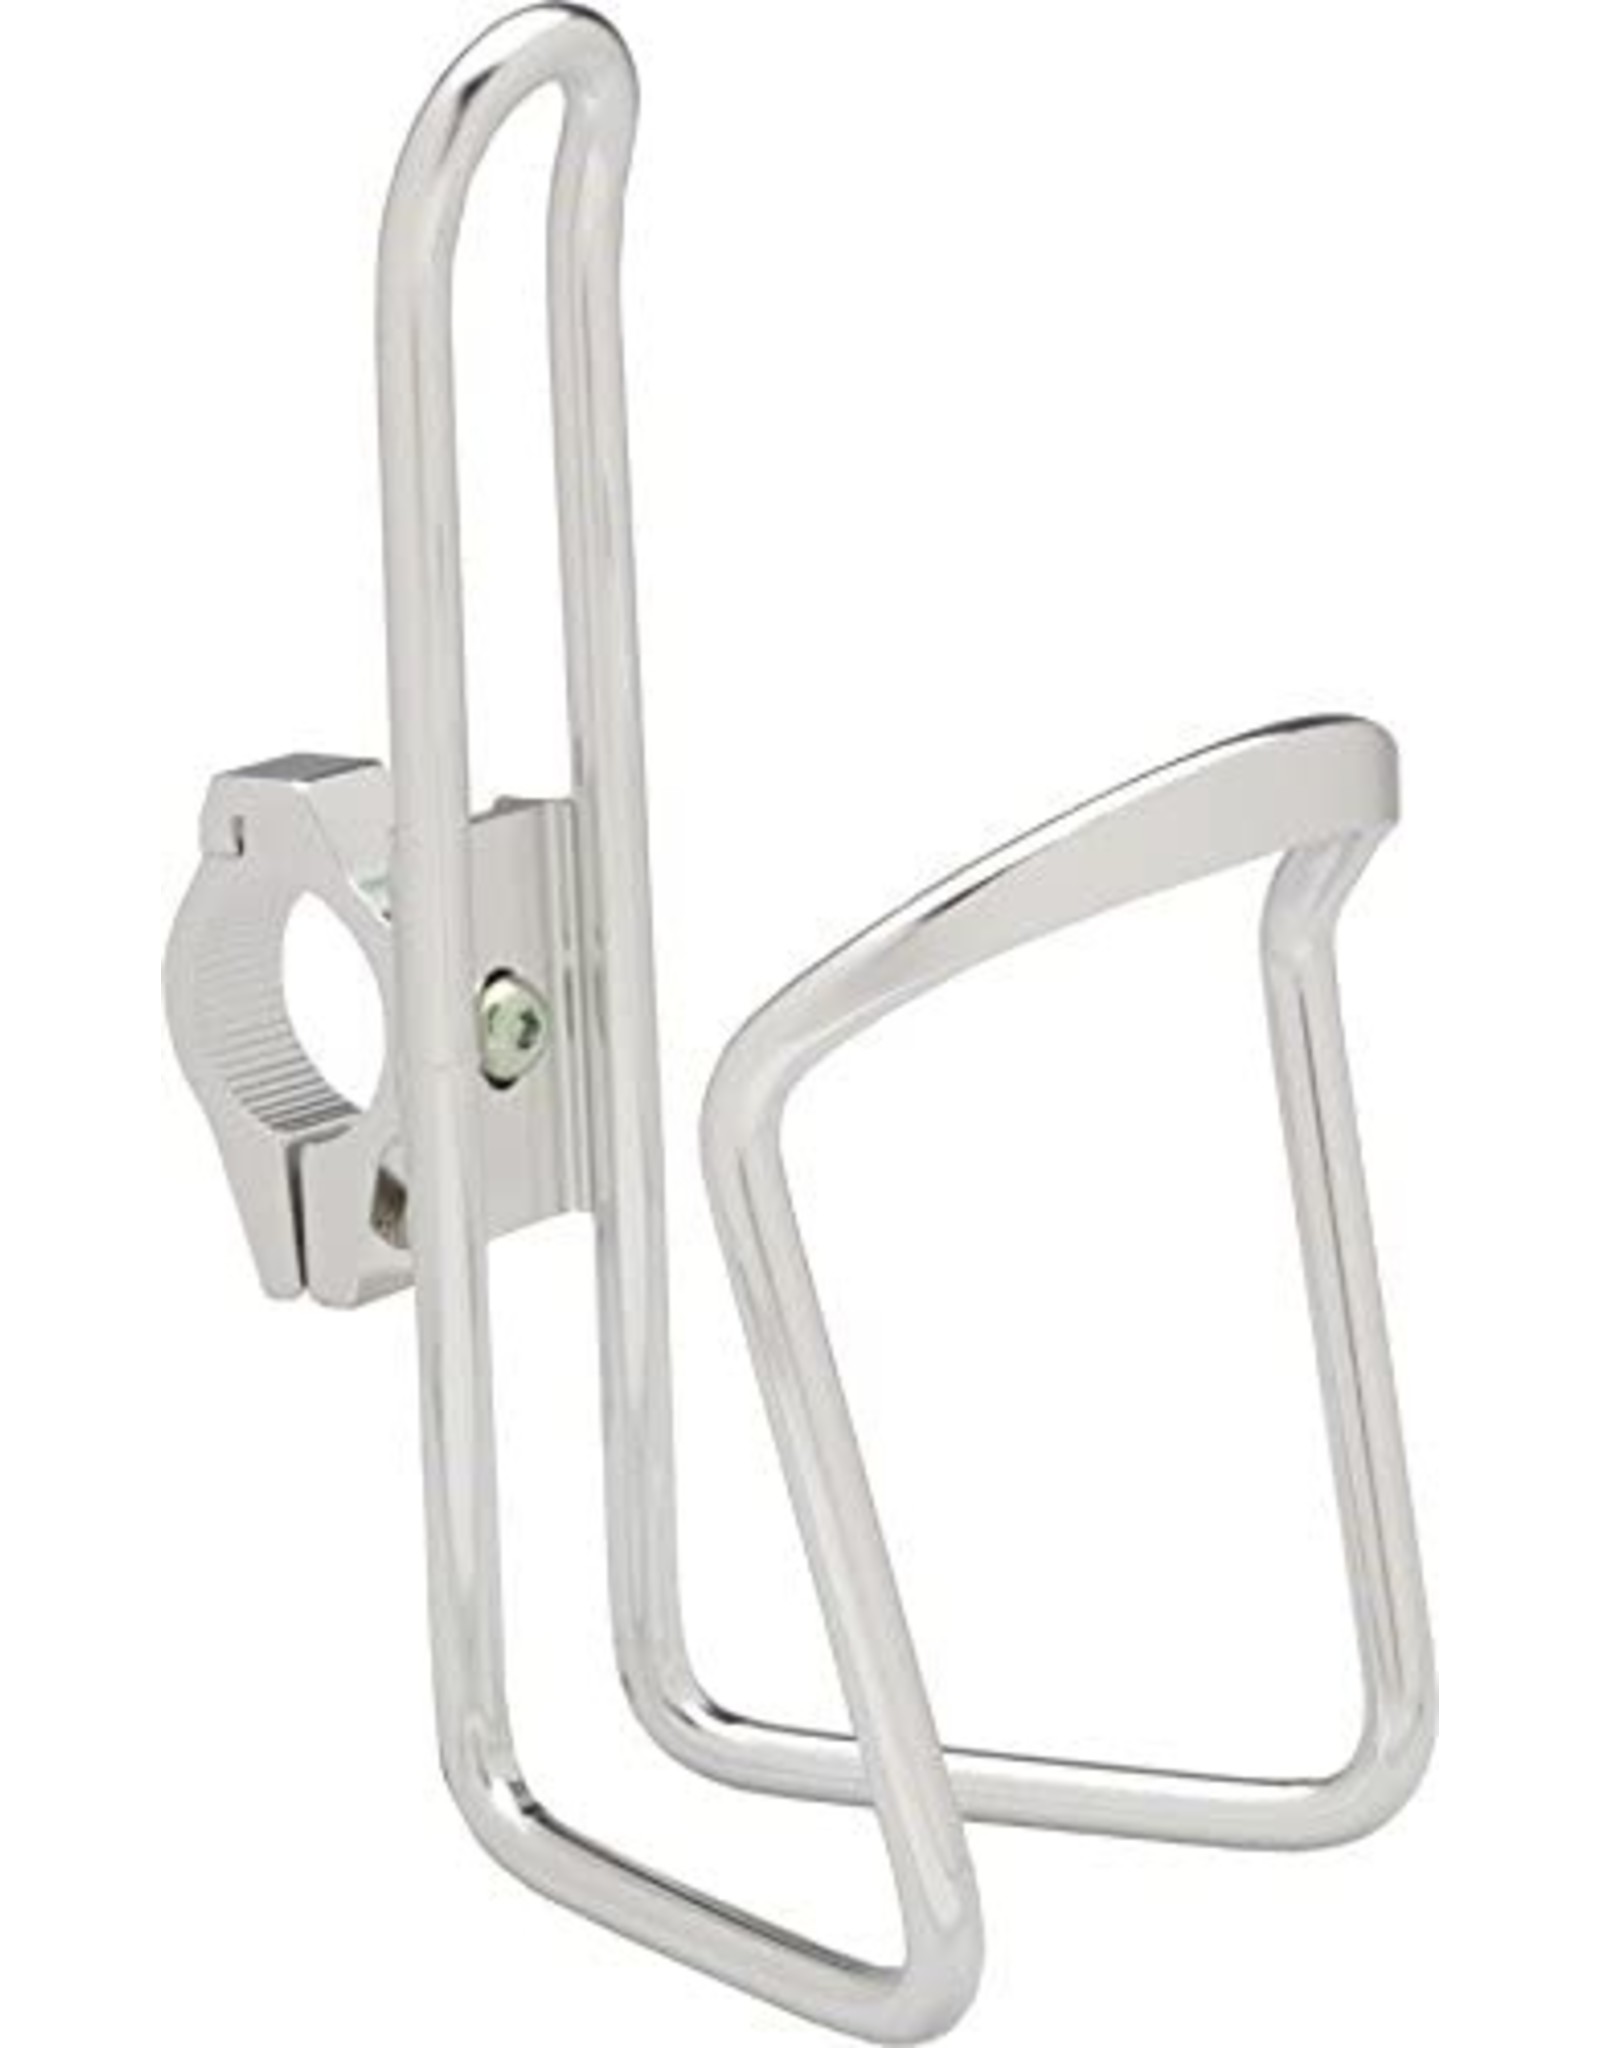 Dimension Dimension Water Bottle Cage w/ adjustable clamp - Silver